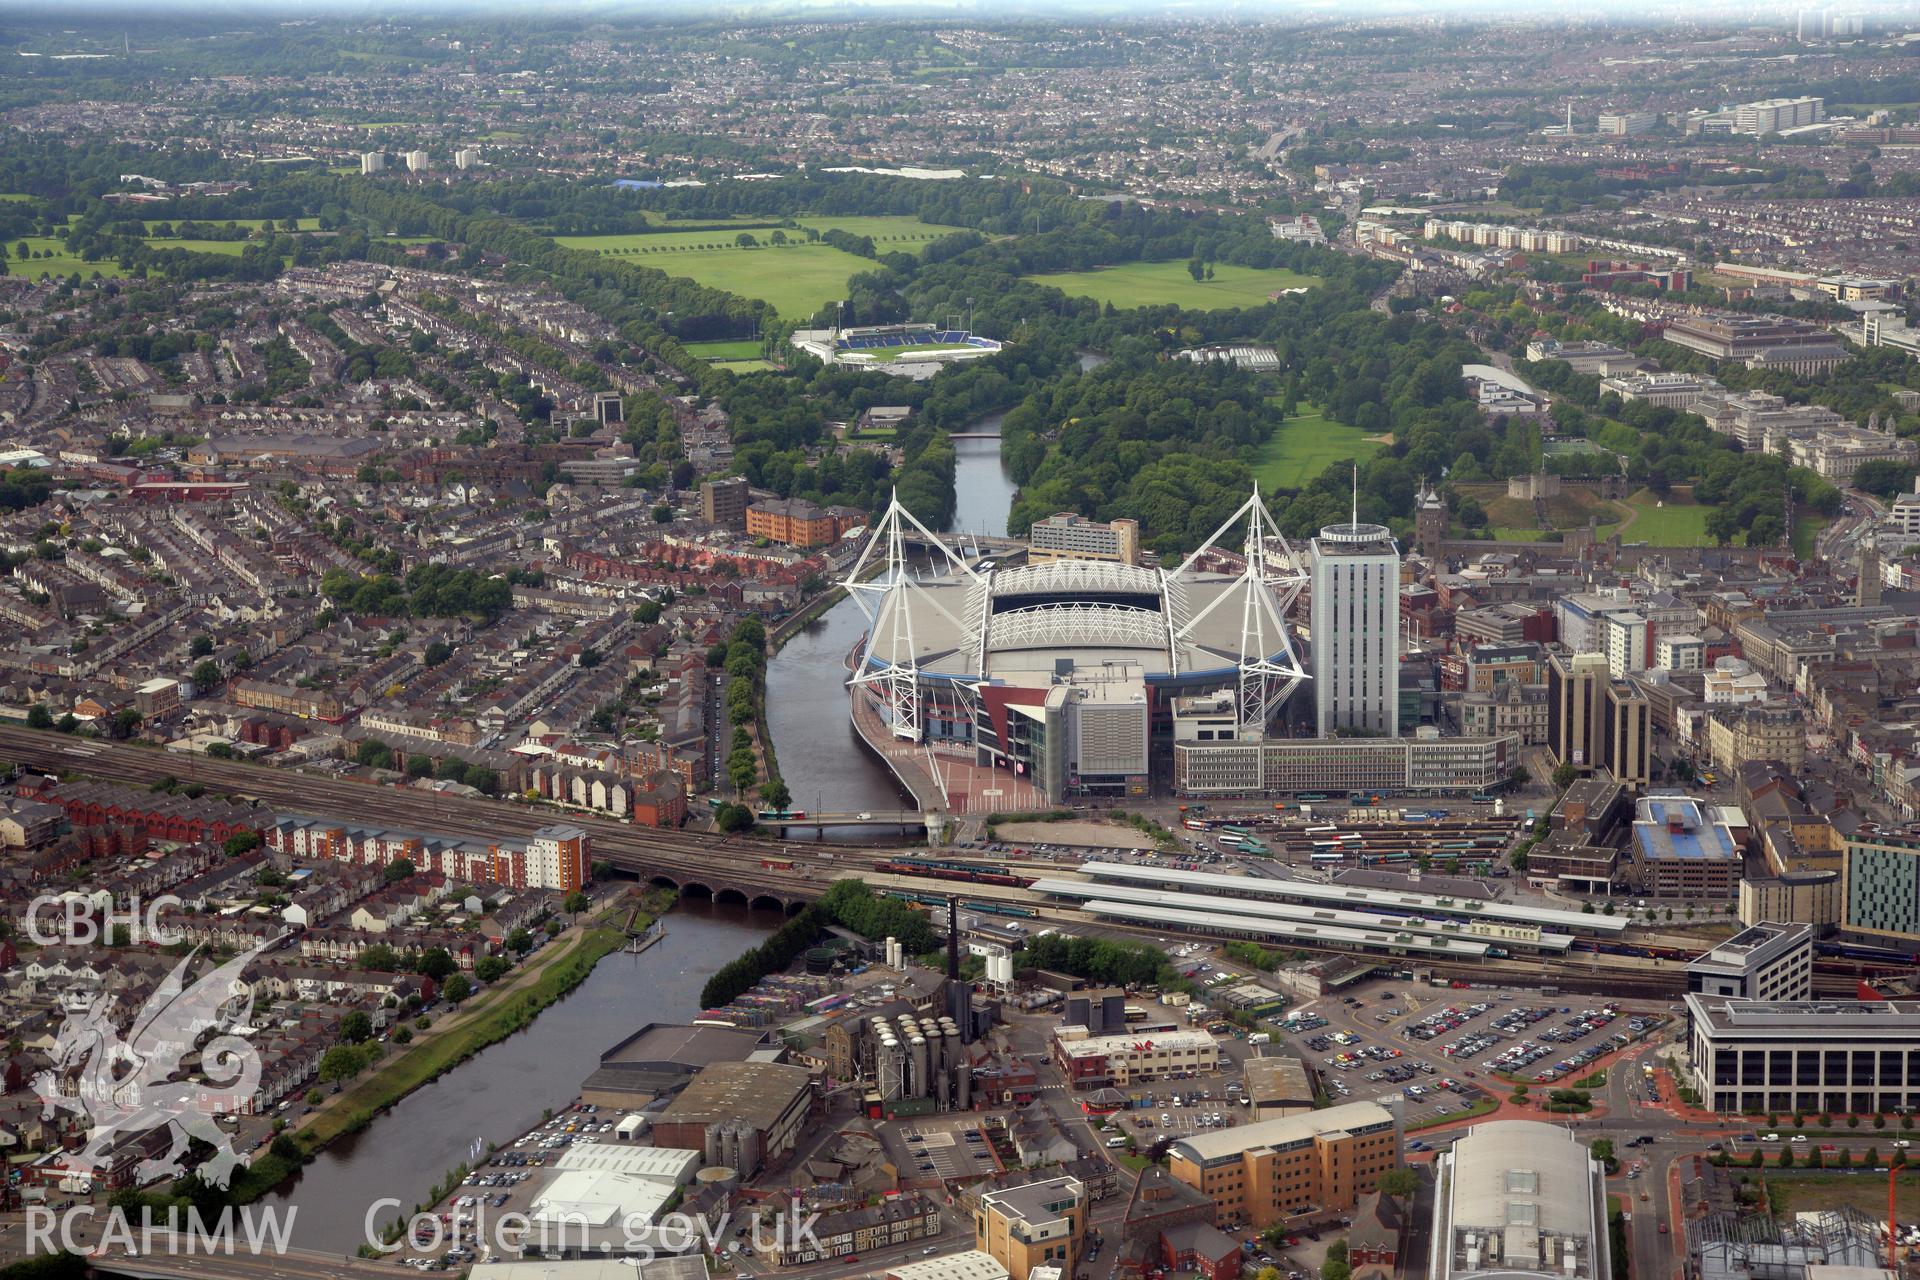 RCAHMW colour oblique photograph of Cardiff Millennium Stadium. Taken by Toby Driver on 13/06/2011.